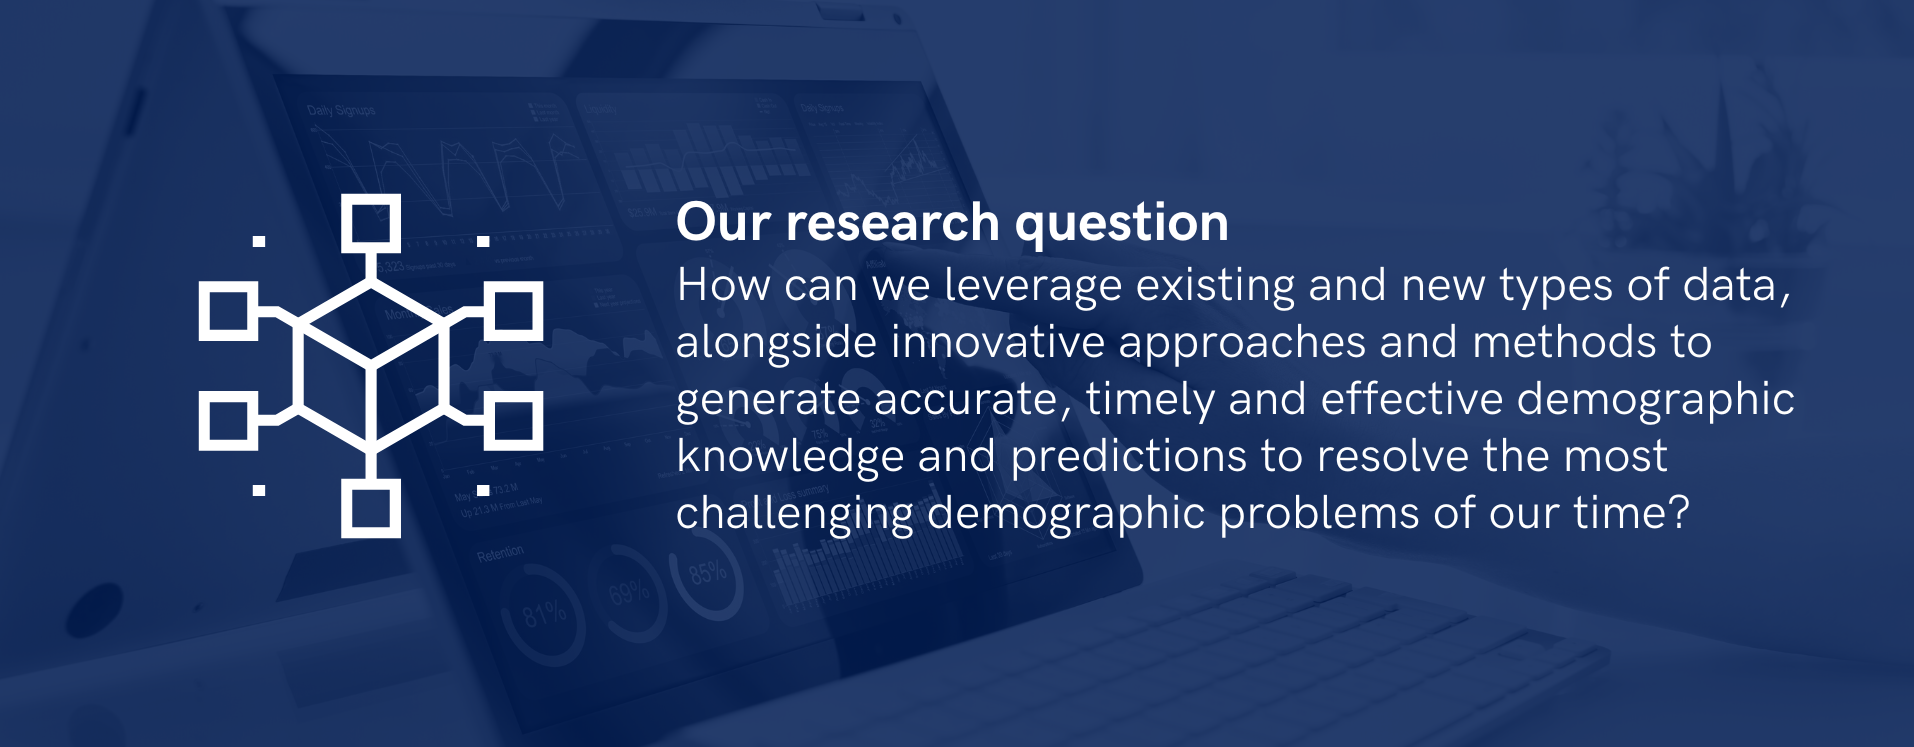 Our research question